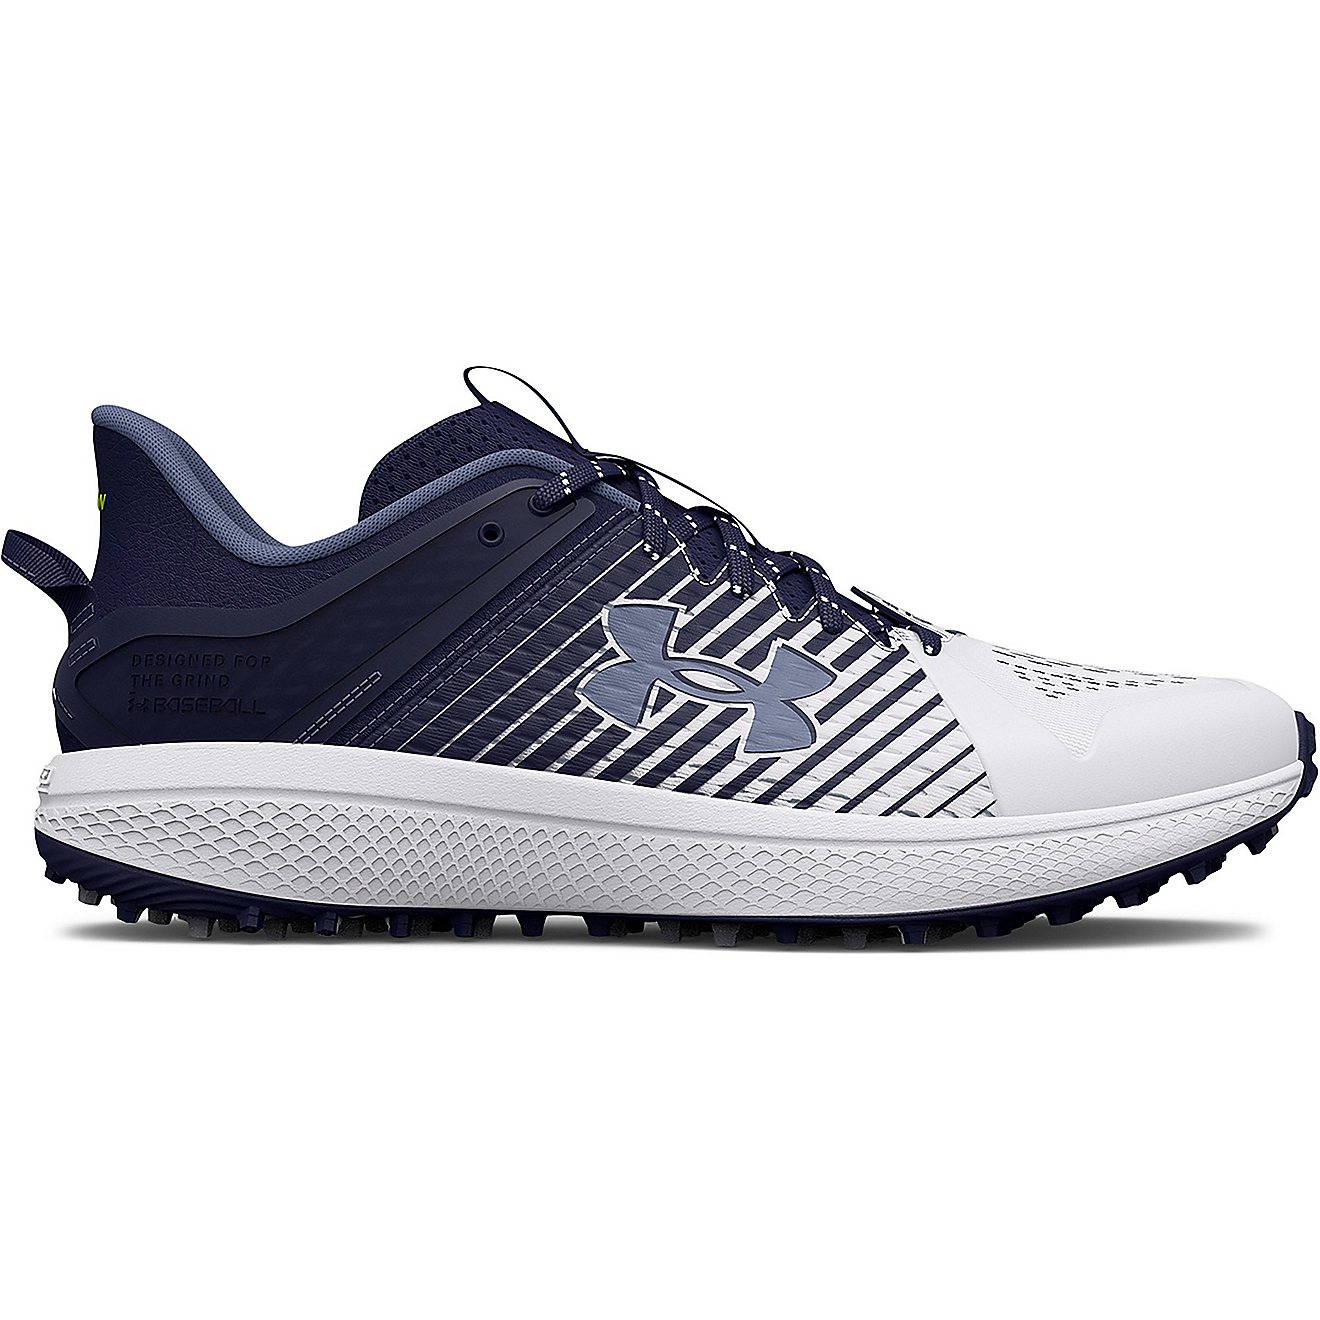 Under Armour Men’s Yard Turf Baseball Cleats                                                                                   - view number 1